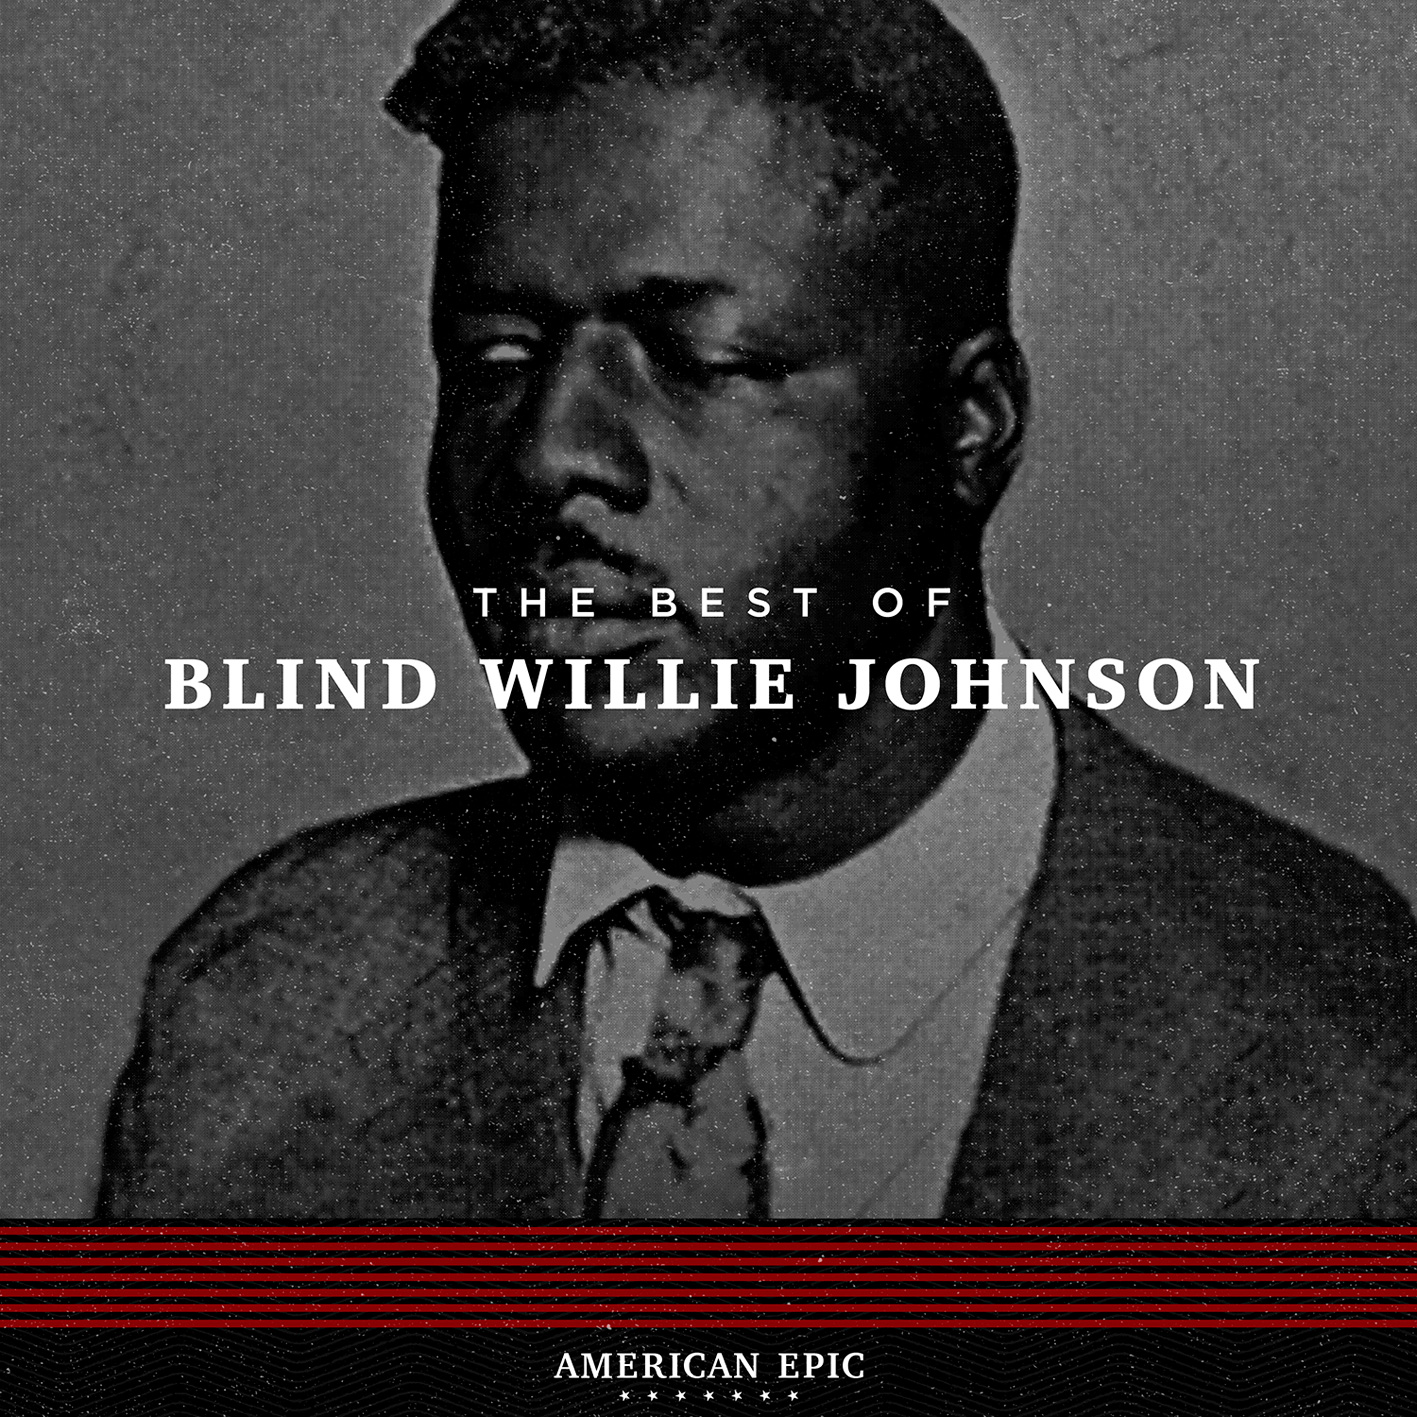 Blind Willie Johnson - American Epic: The Best Of Blind Willie Johnson (2017) [HDTracks FLAC 24bit/96kHz]